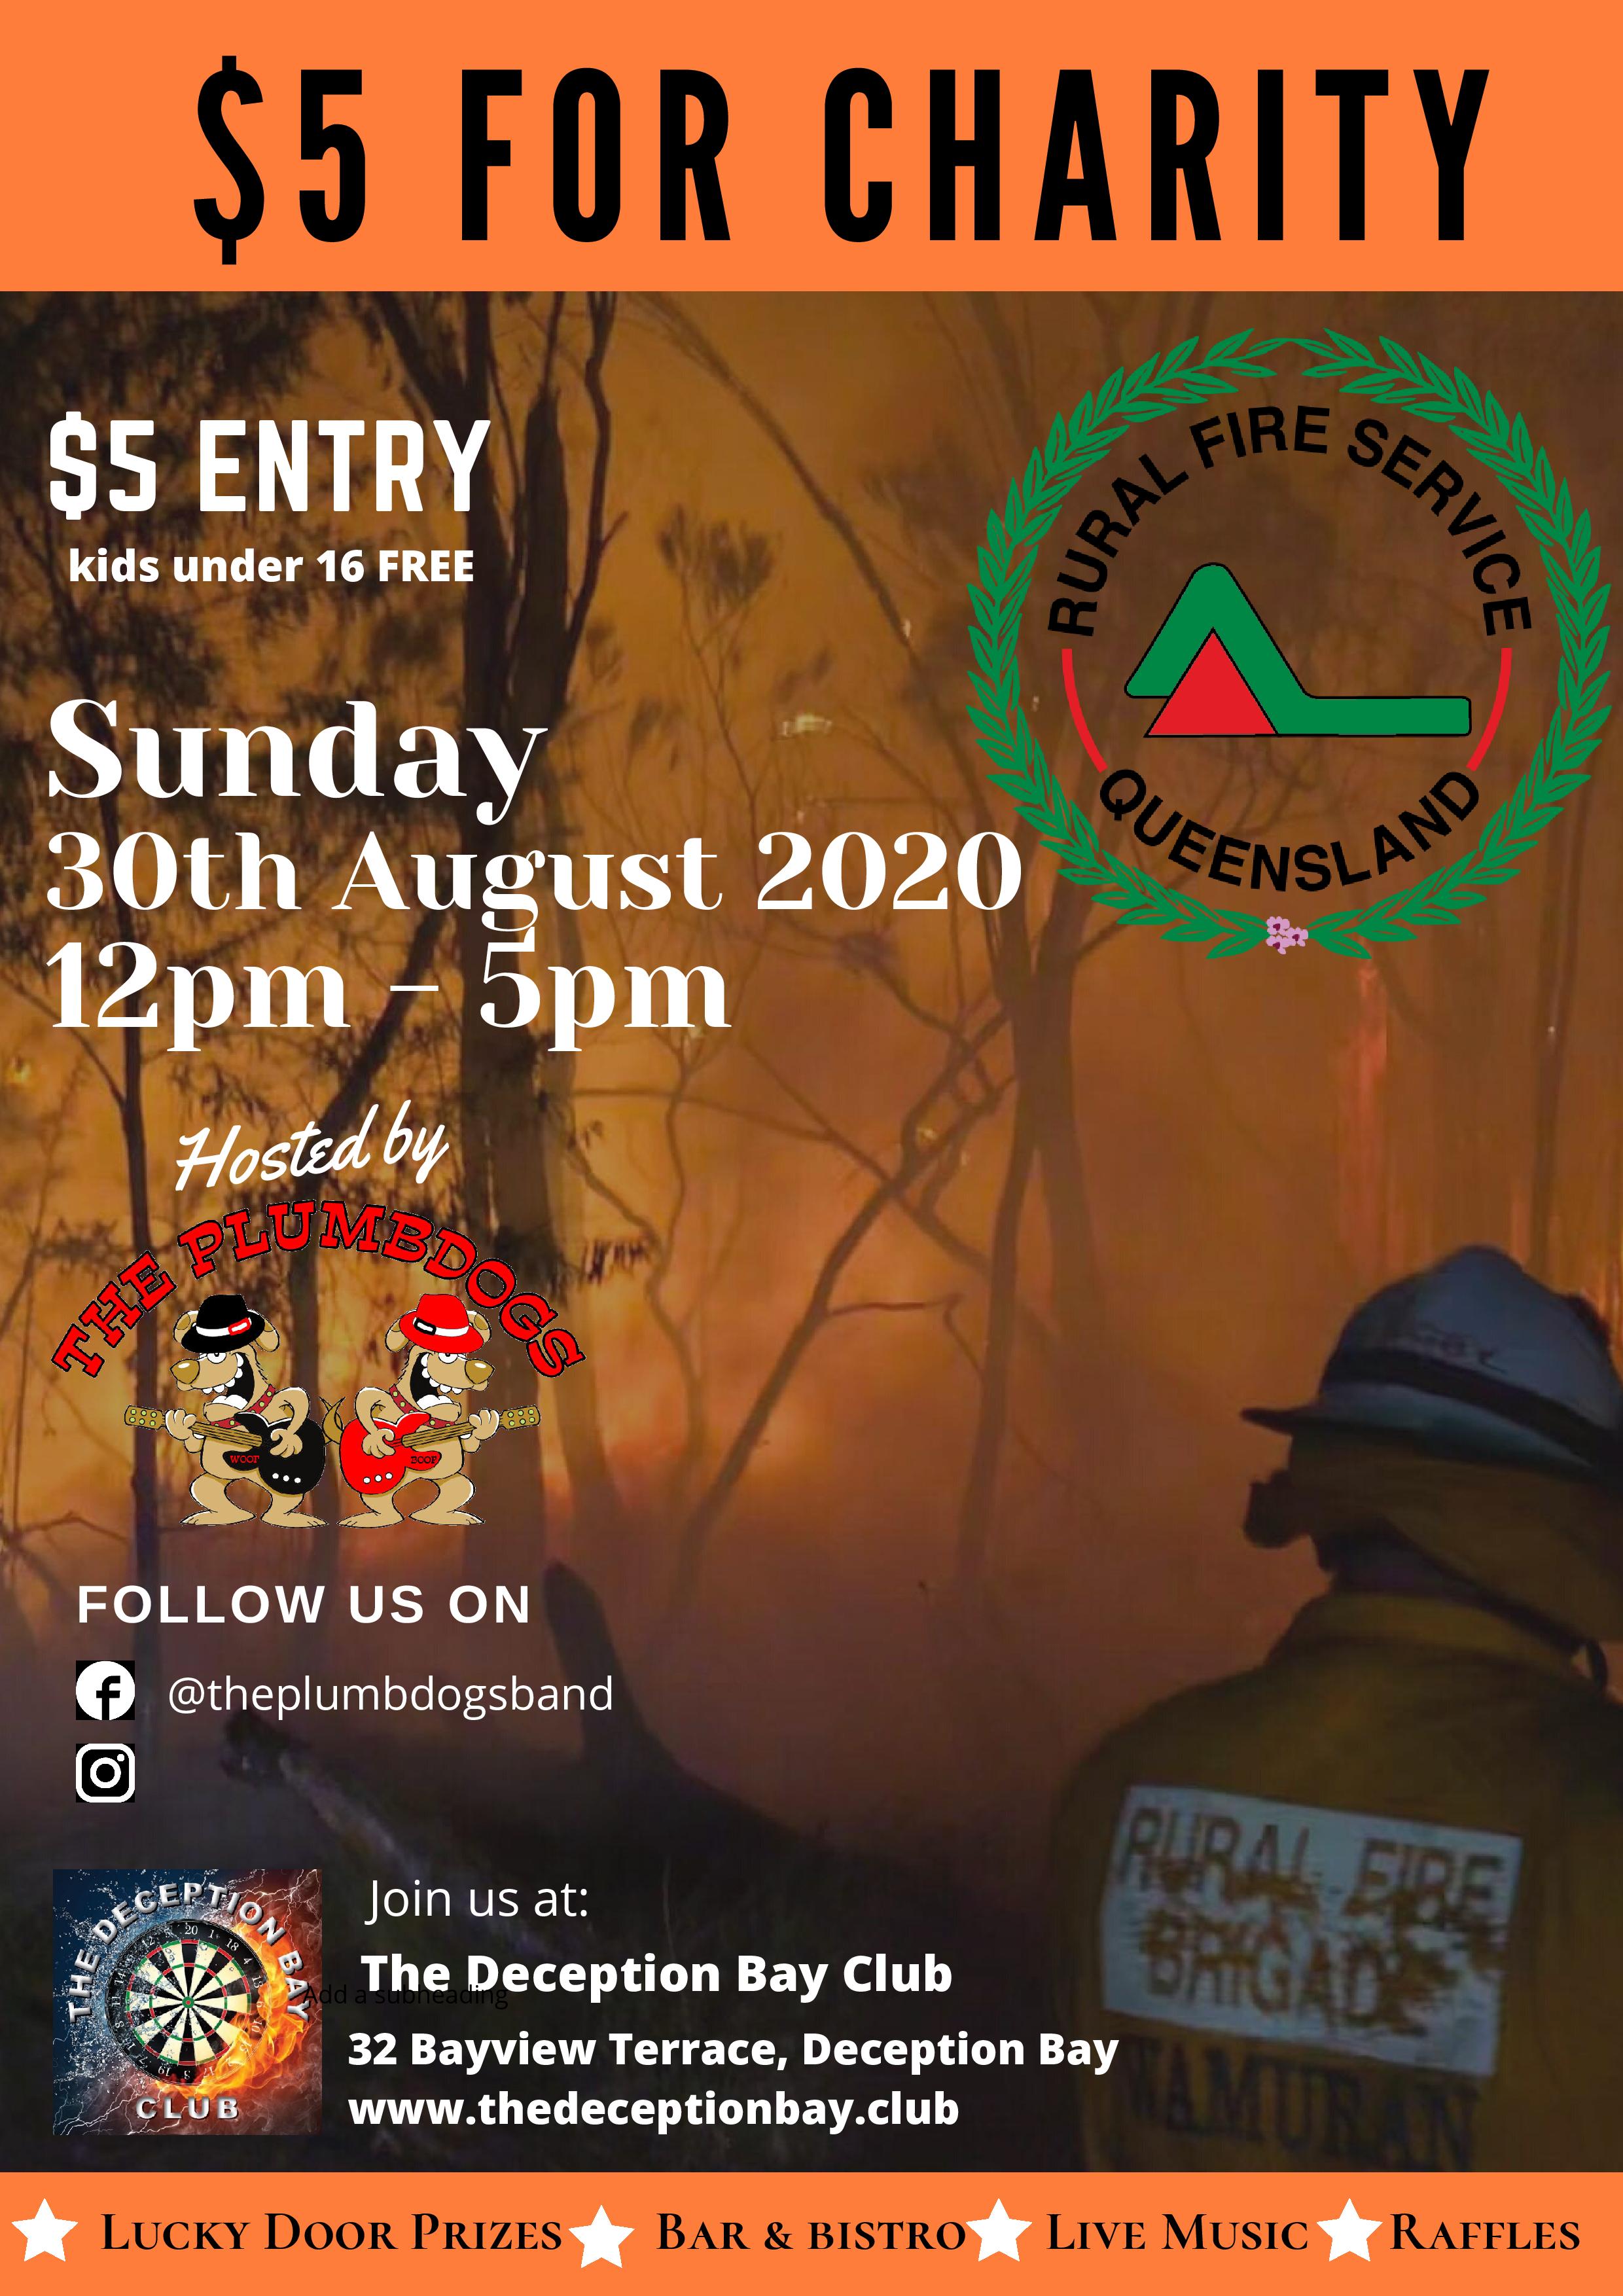 5 For Charity Rural Fire Service Queensland 30th August 2020